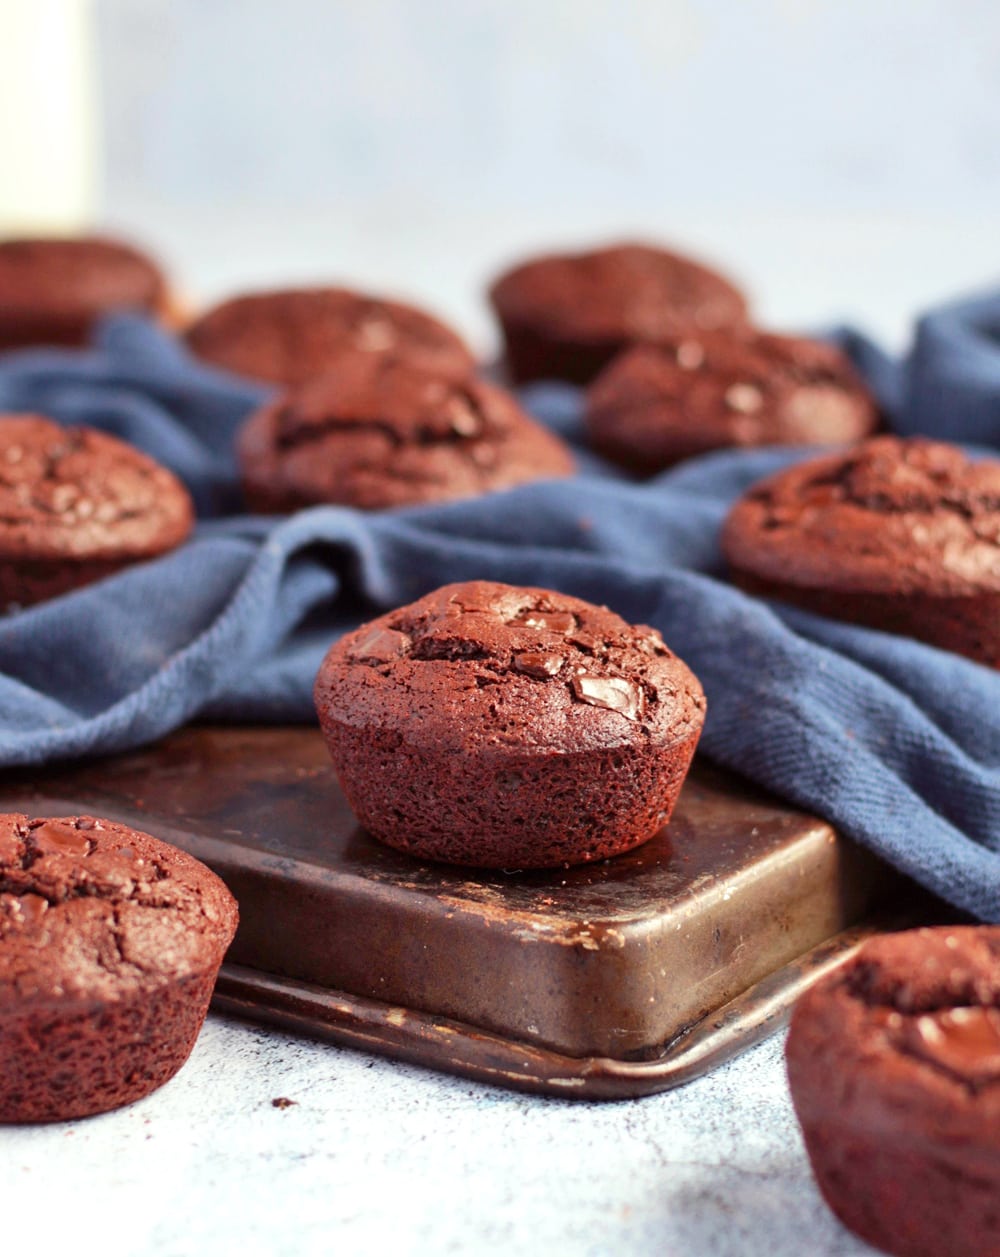 Muffins on the corner of a baking tray with blue napkin